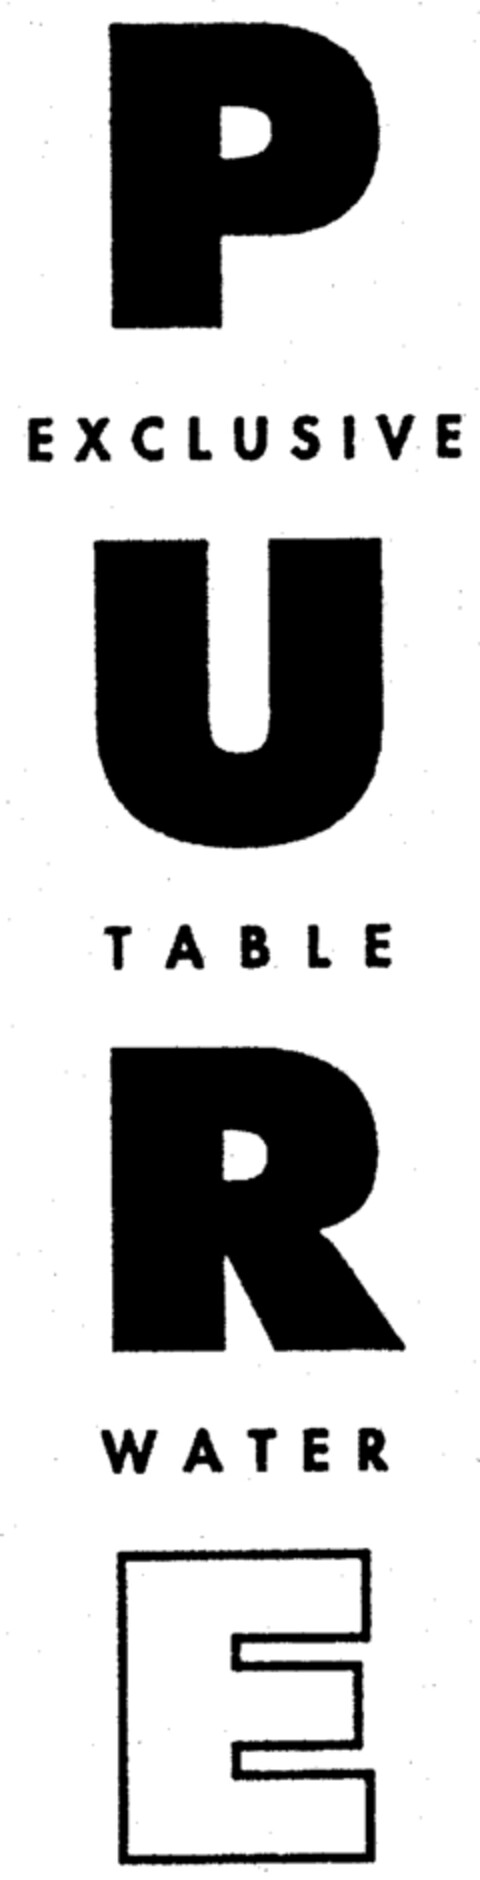 PURE EXCLUSIVE TABLE WATER Logo (IGE, 12.09.1997)